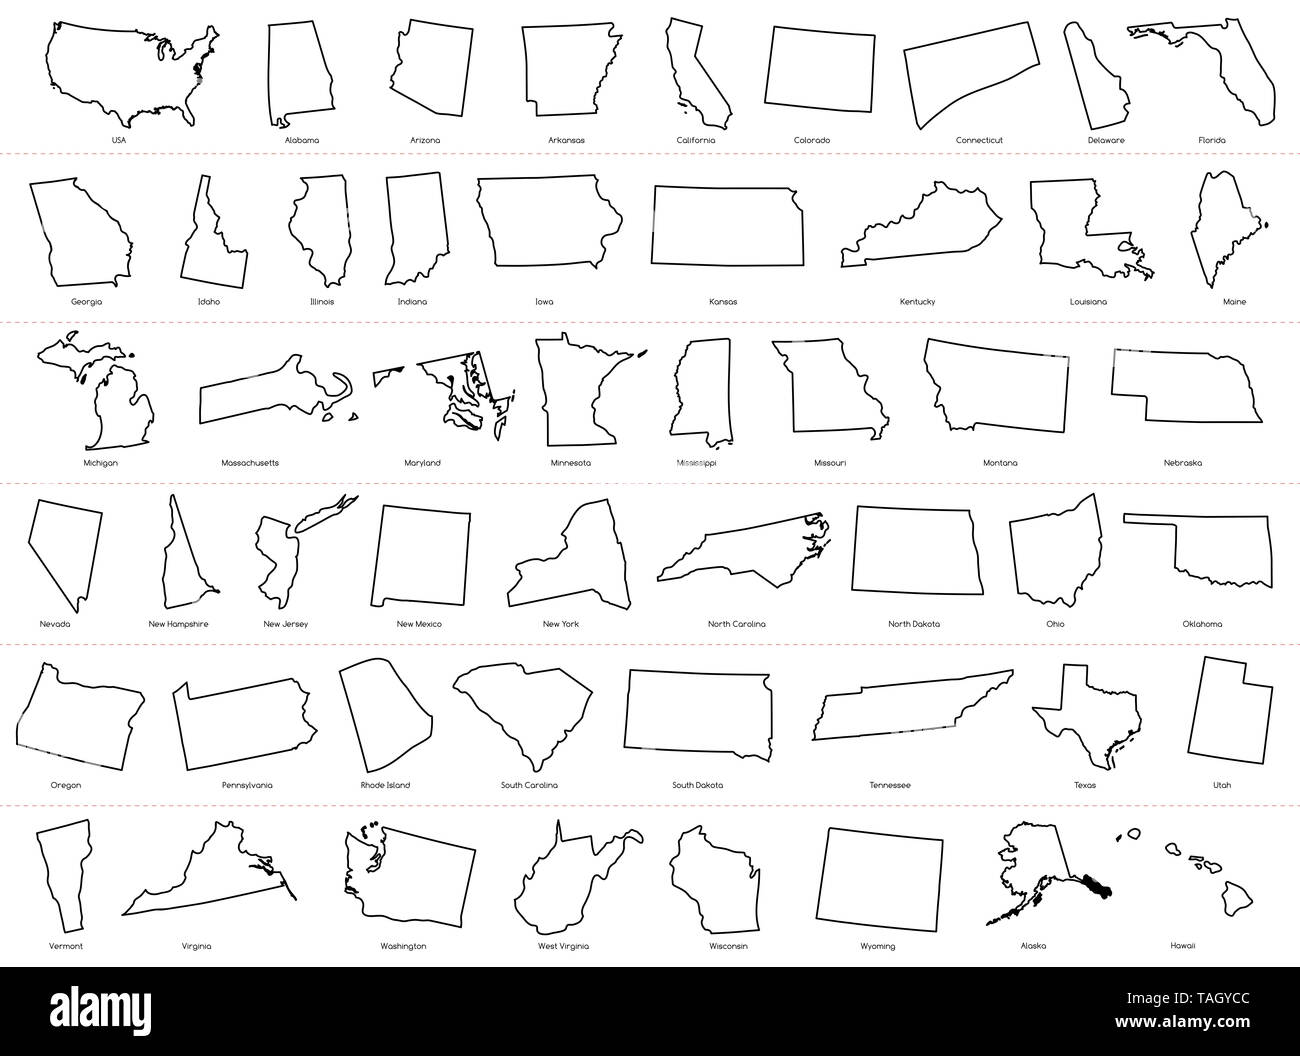 Map of The United States of America (USA) Divided States Maps Outline Illustration on White Background Stock Photo